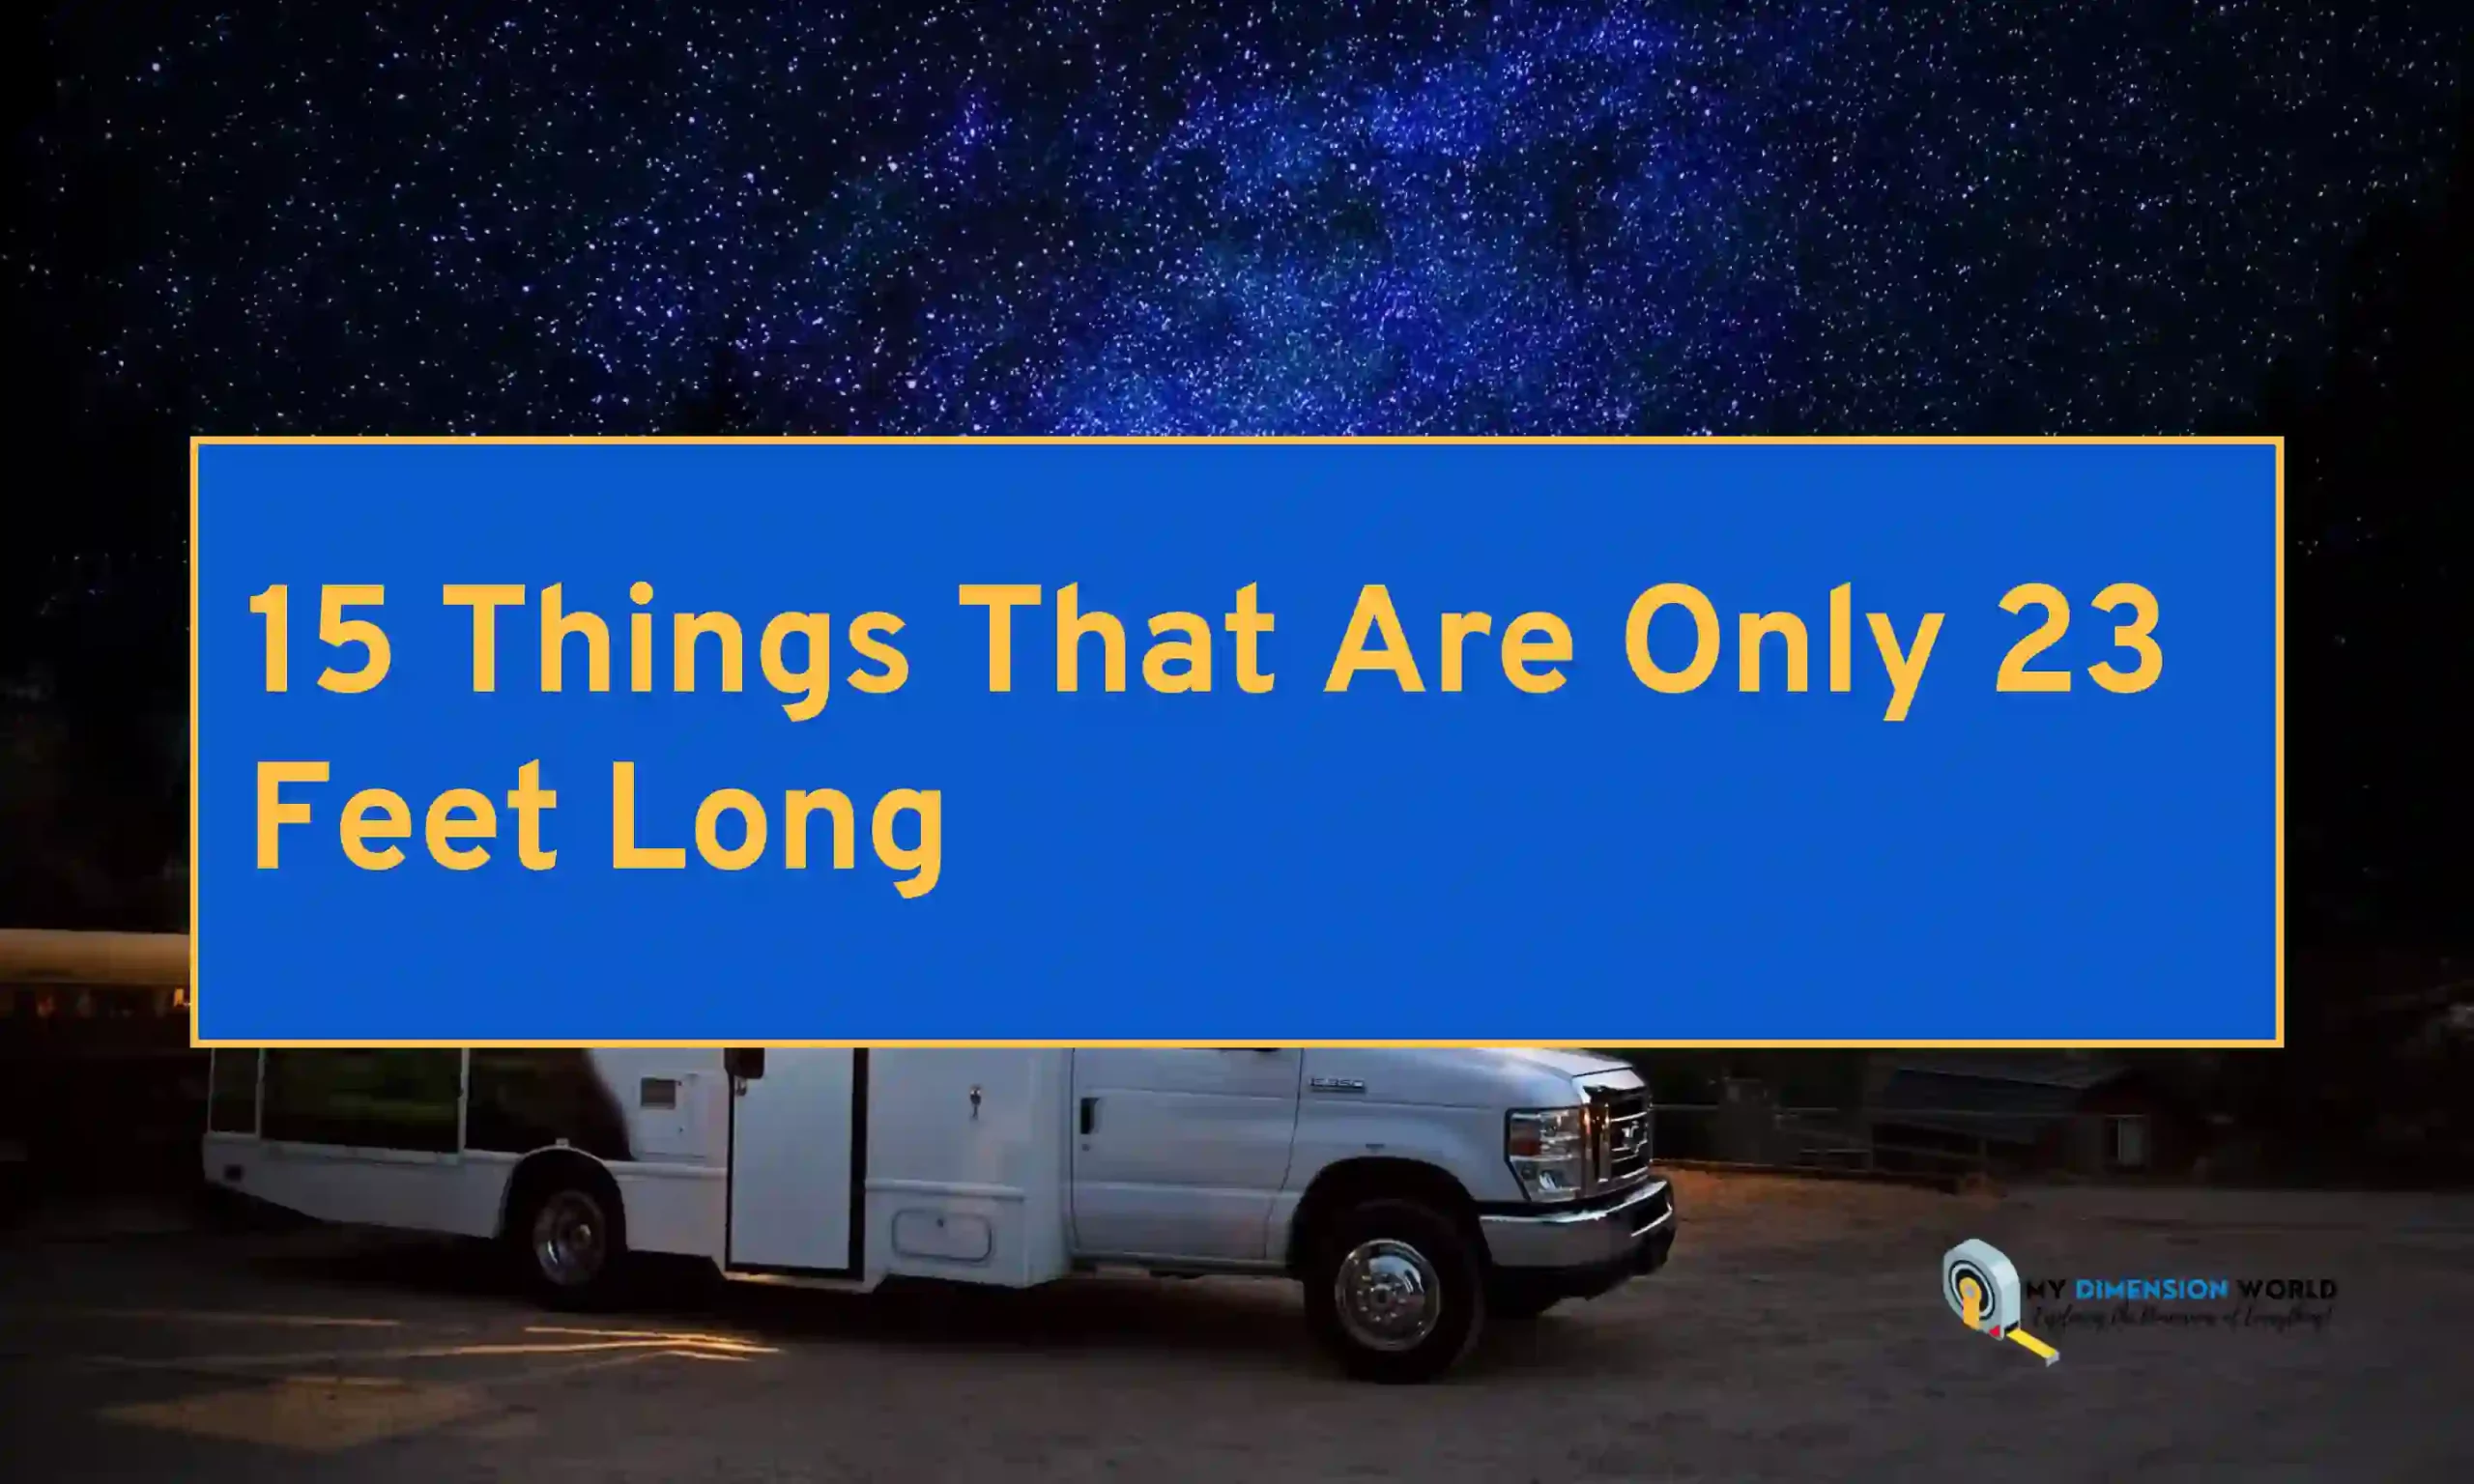 15 Things That Are Only 23 Feet Long